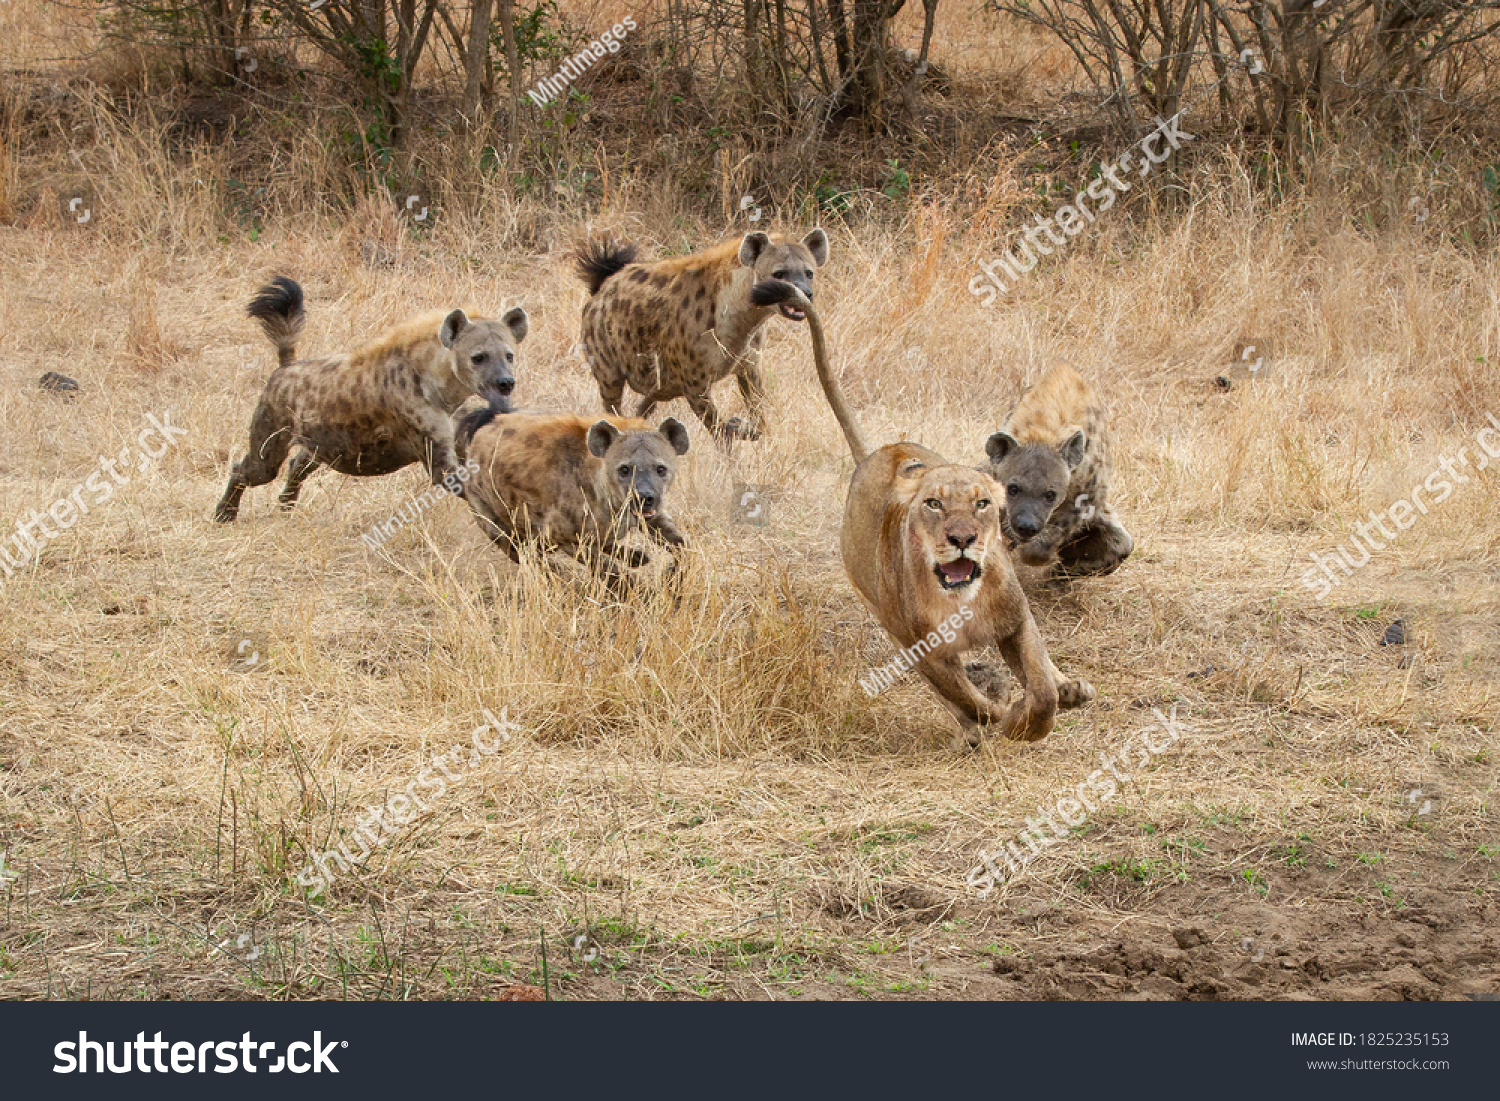 A lioness, Panthera leo, runs with ears back and mouth open from spotted hyenas, Crocuta crocuta #1825235153